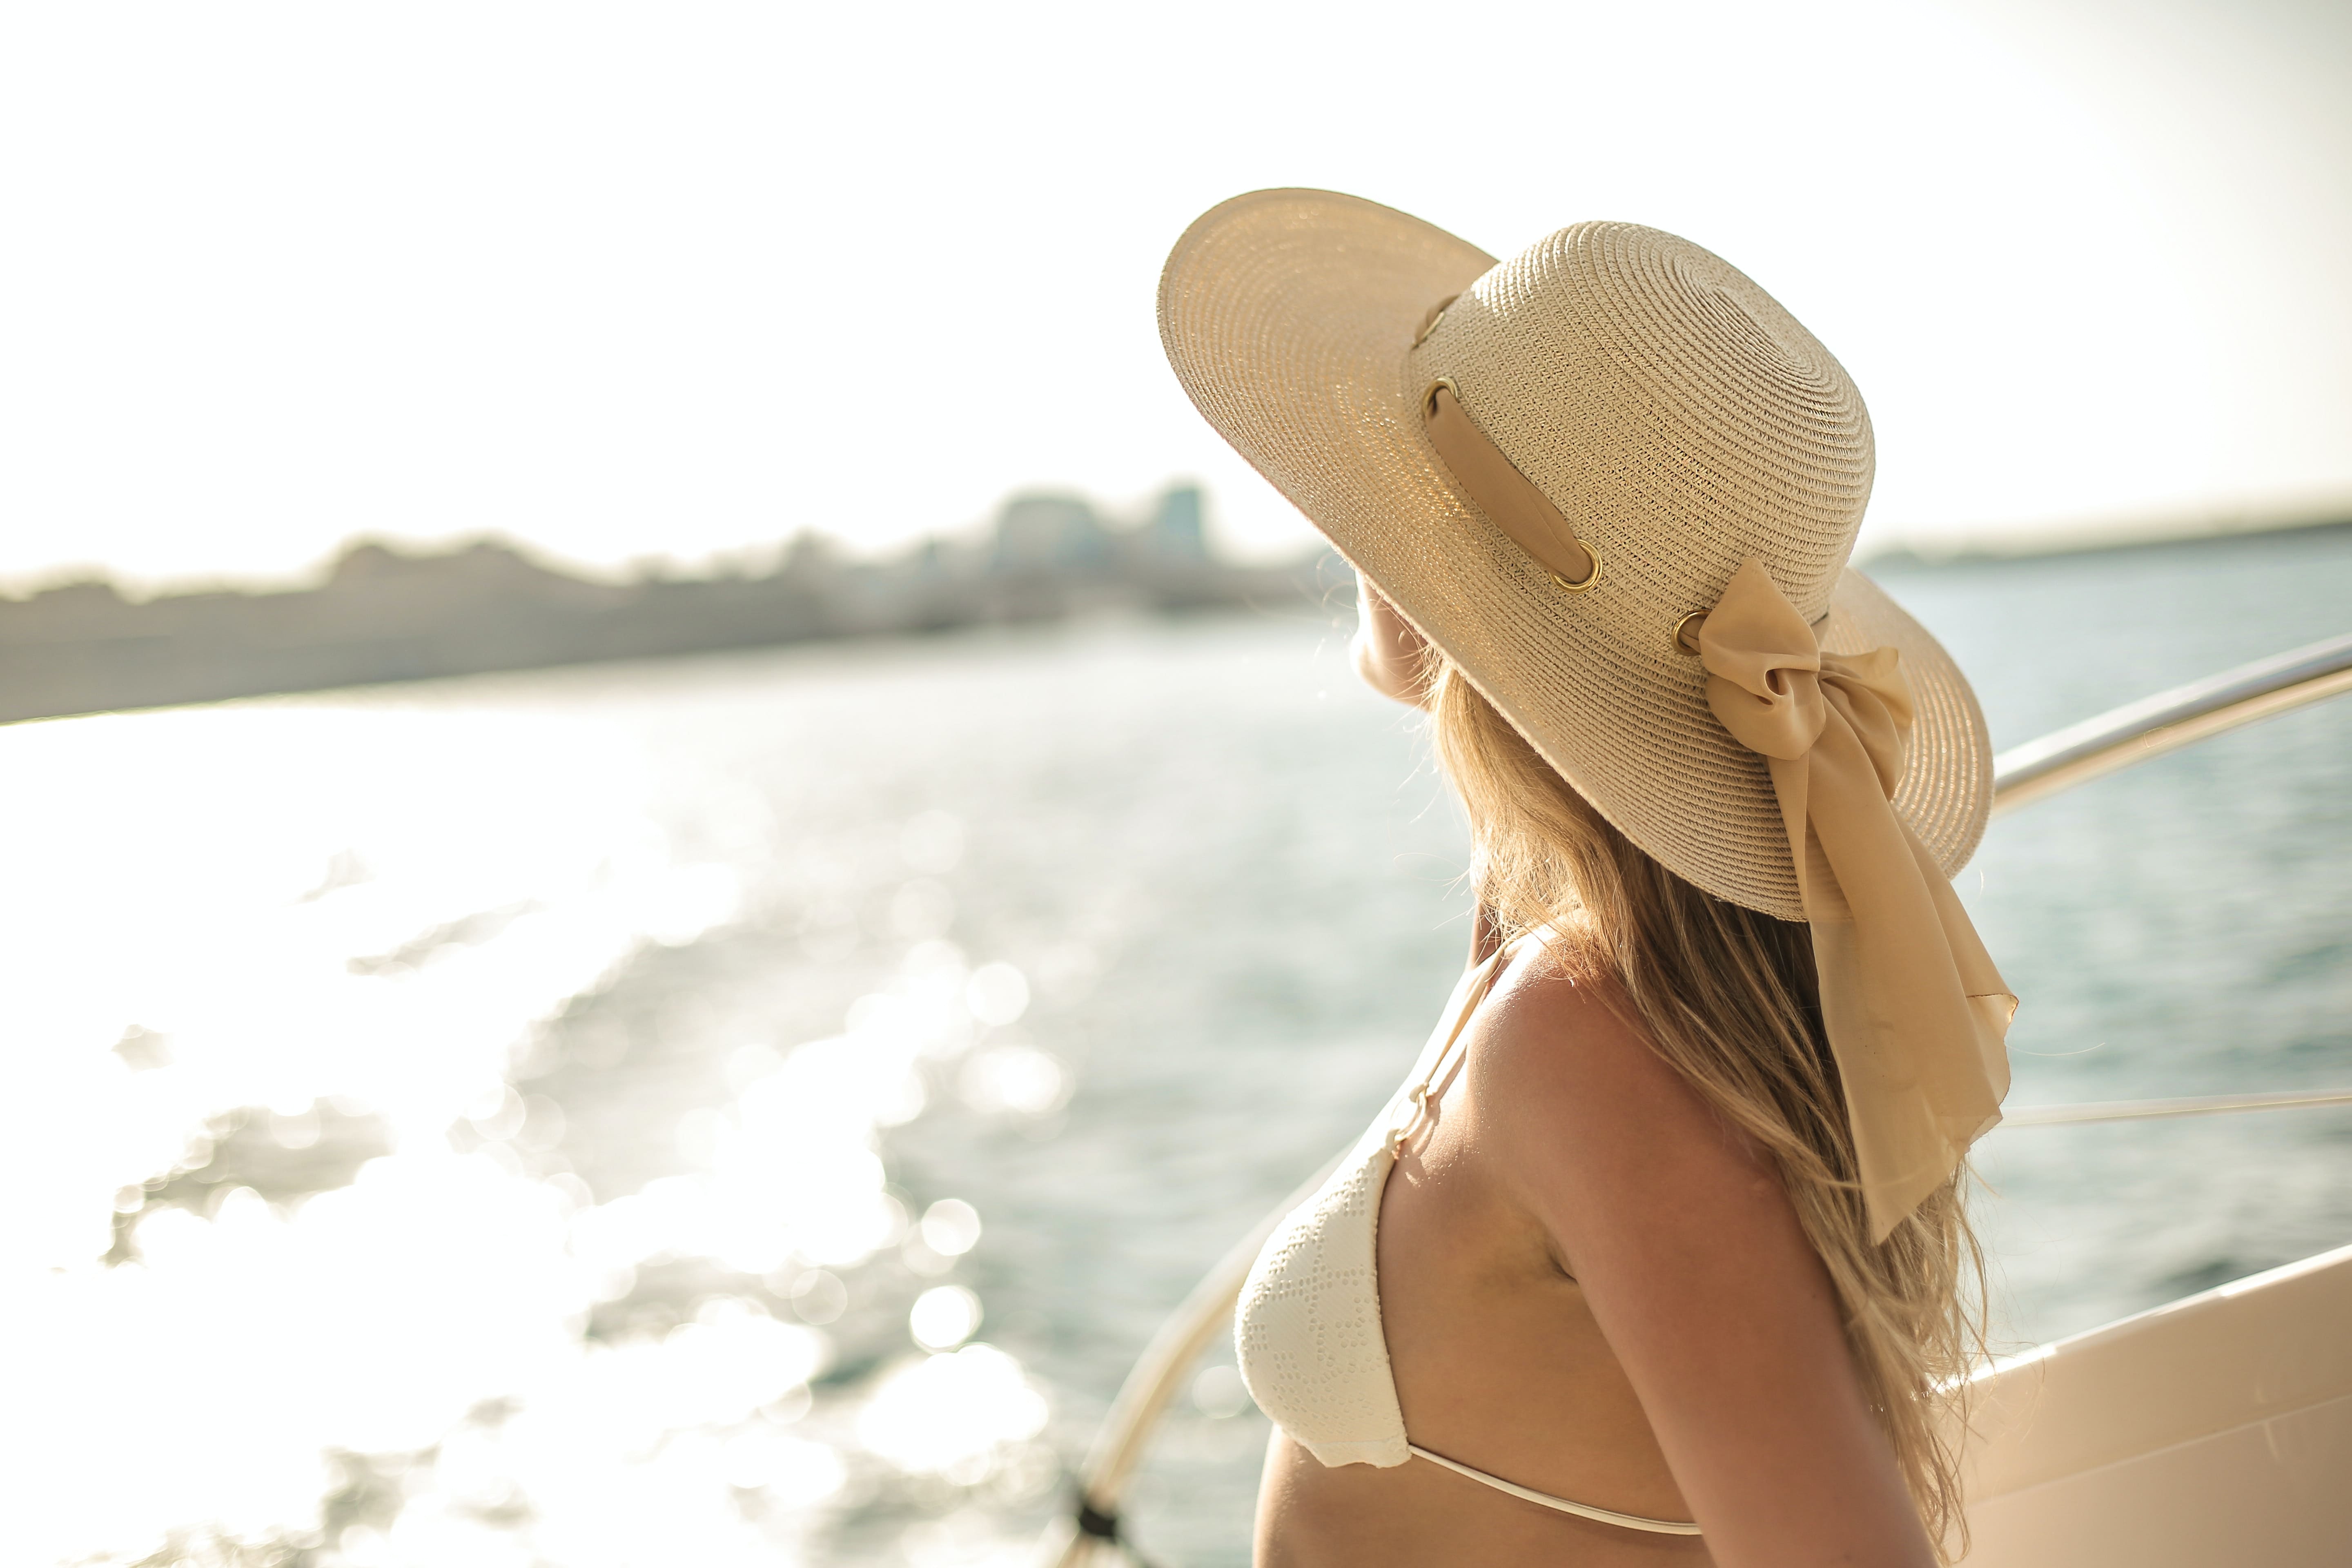 Yacht rentals in Tulum; women with a hat on a yacht